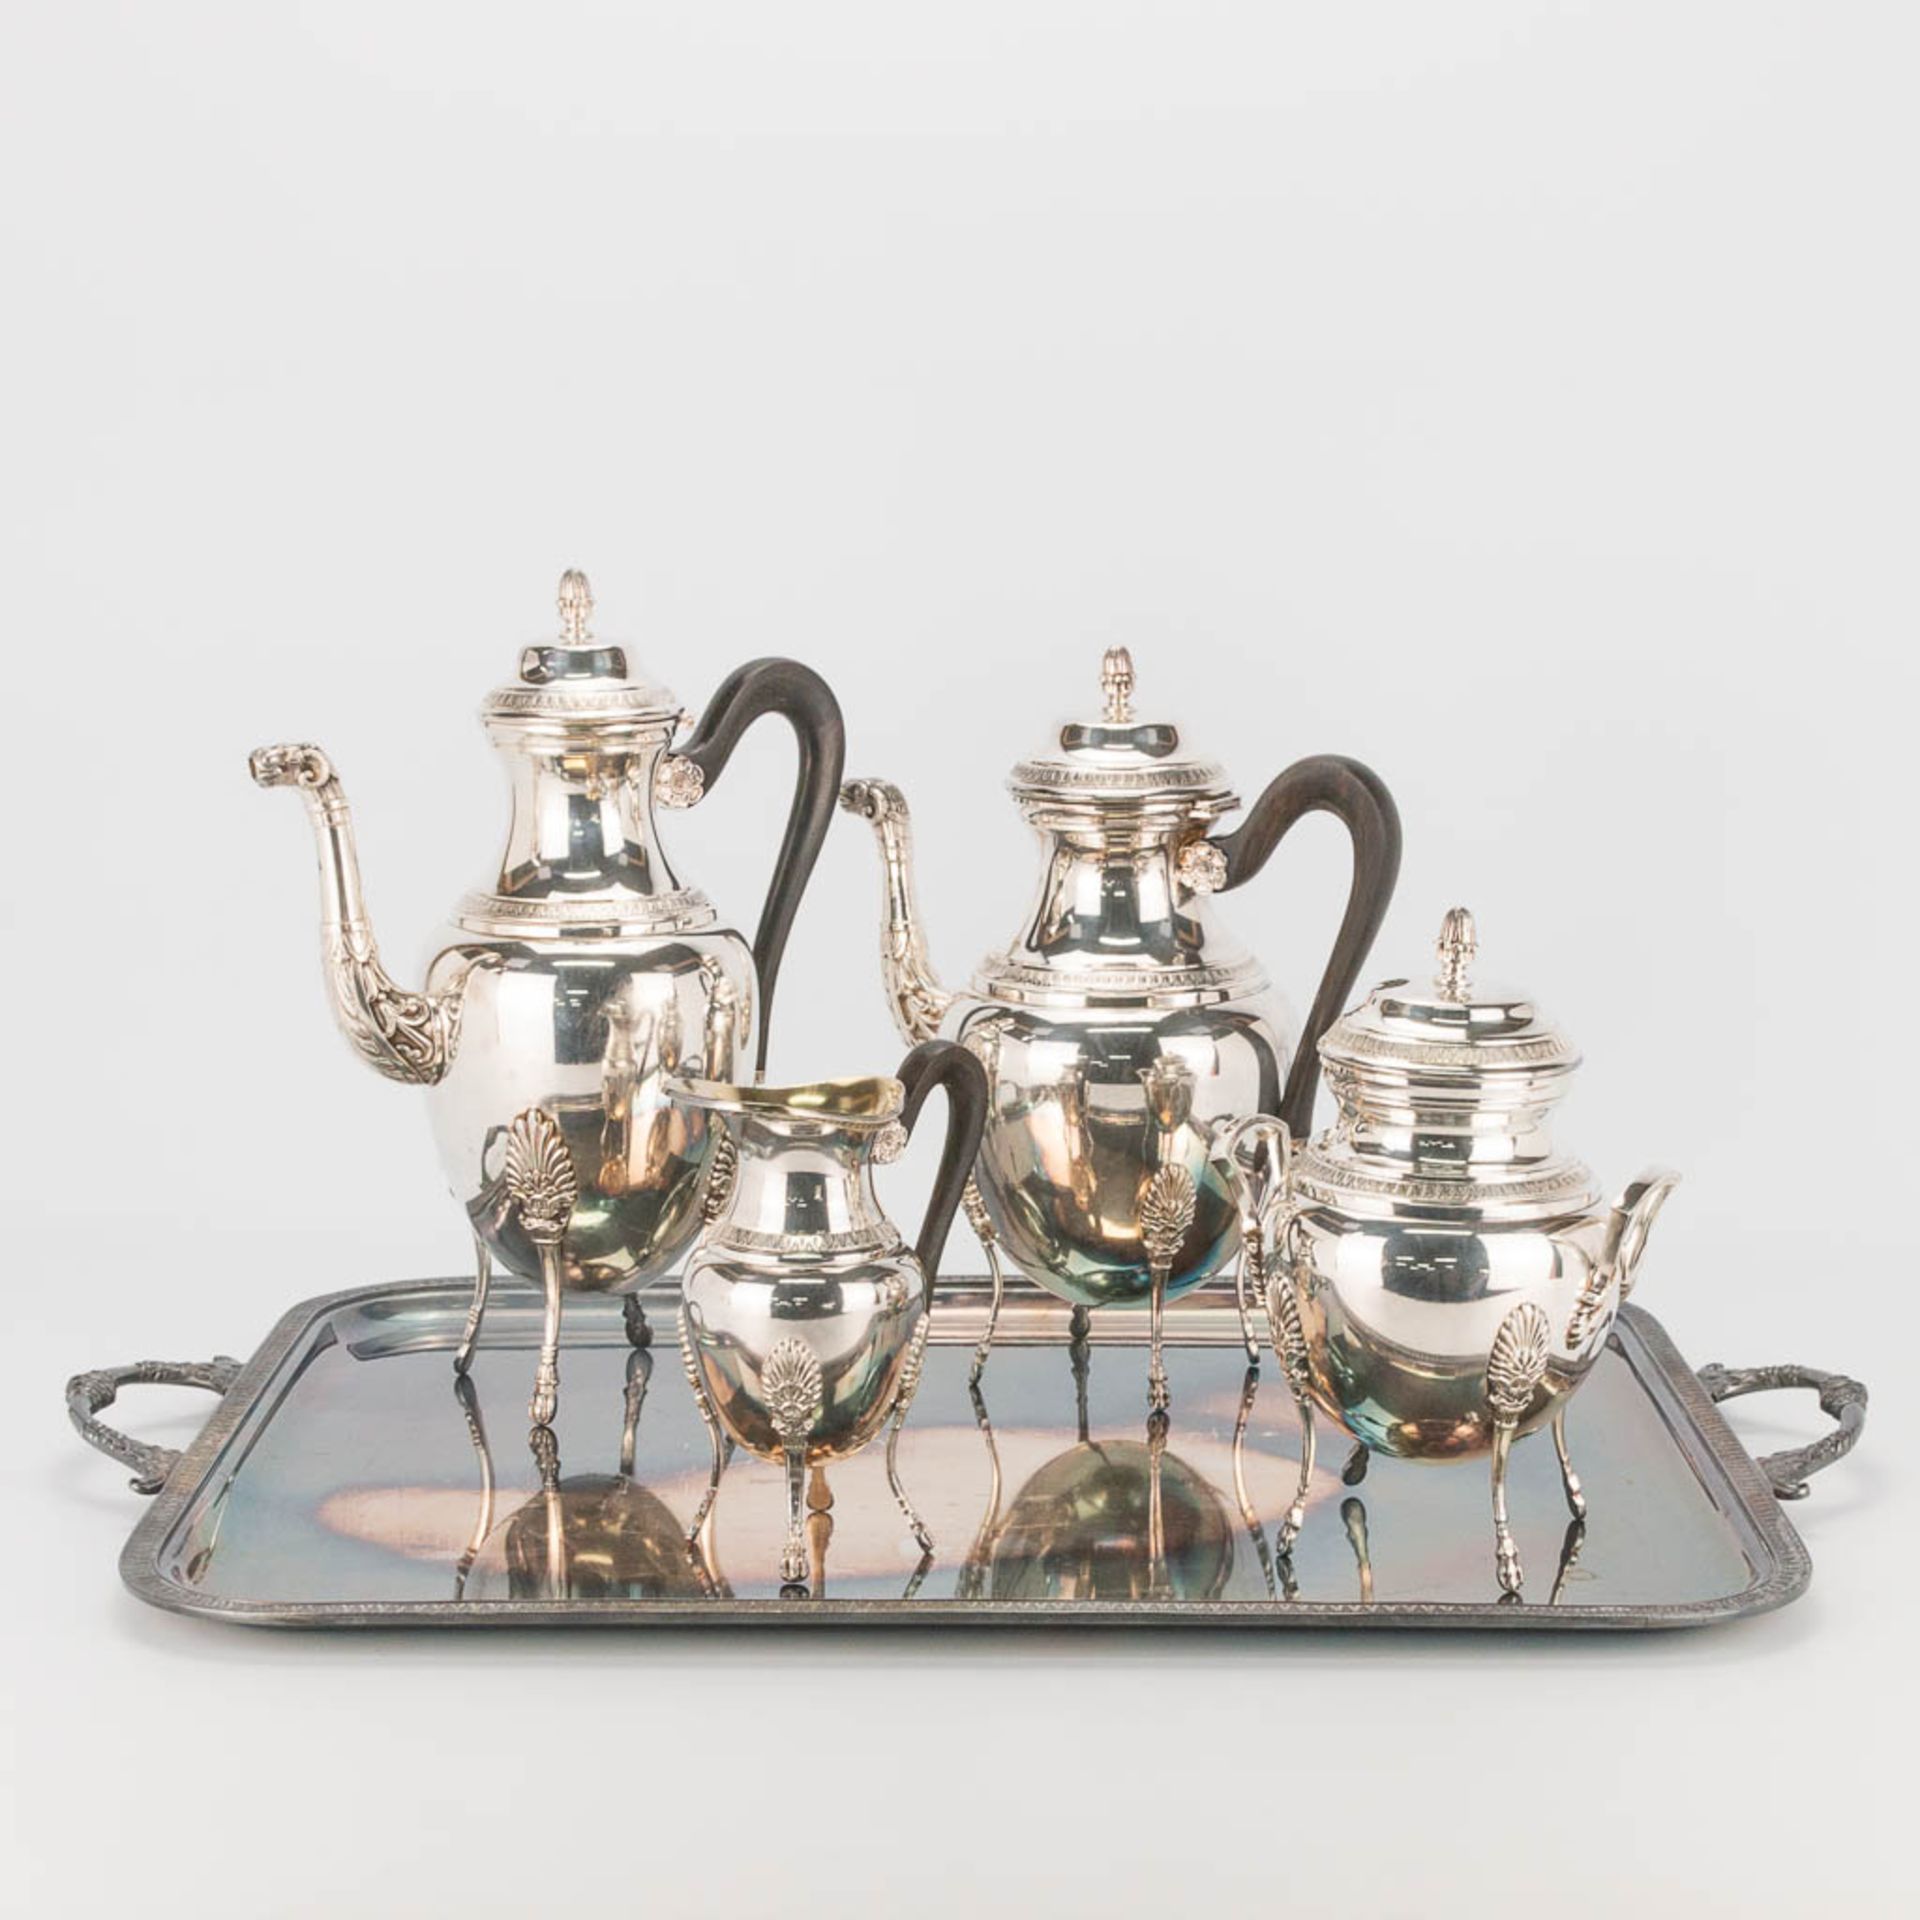 A silver-plated coffee and tea service, on a serving tray. With ebony handles. In the style of a Mal